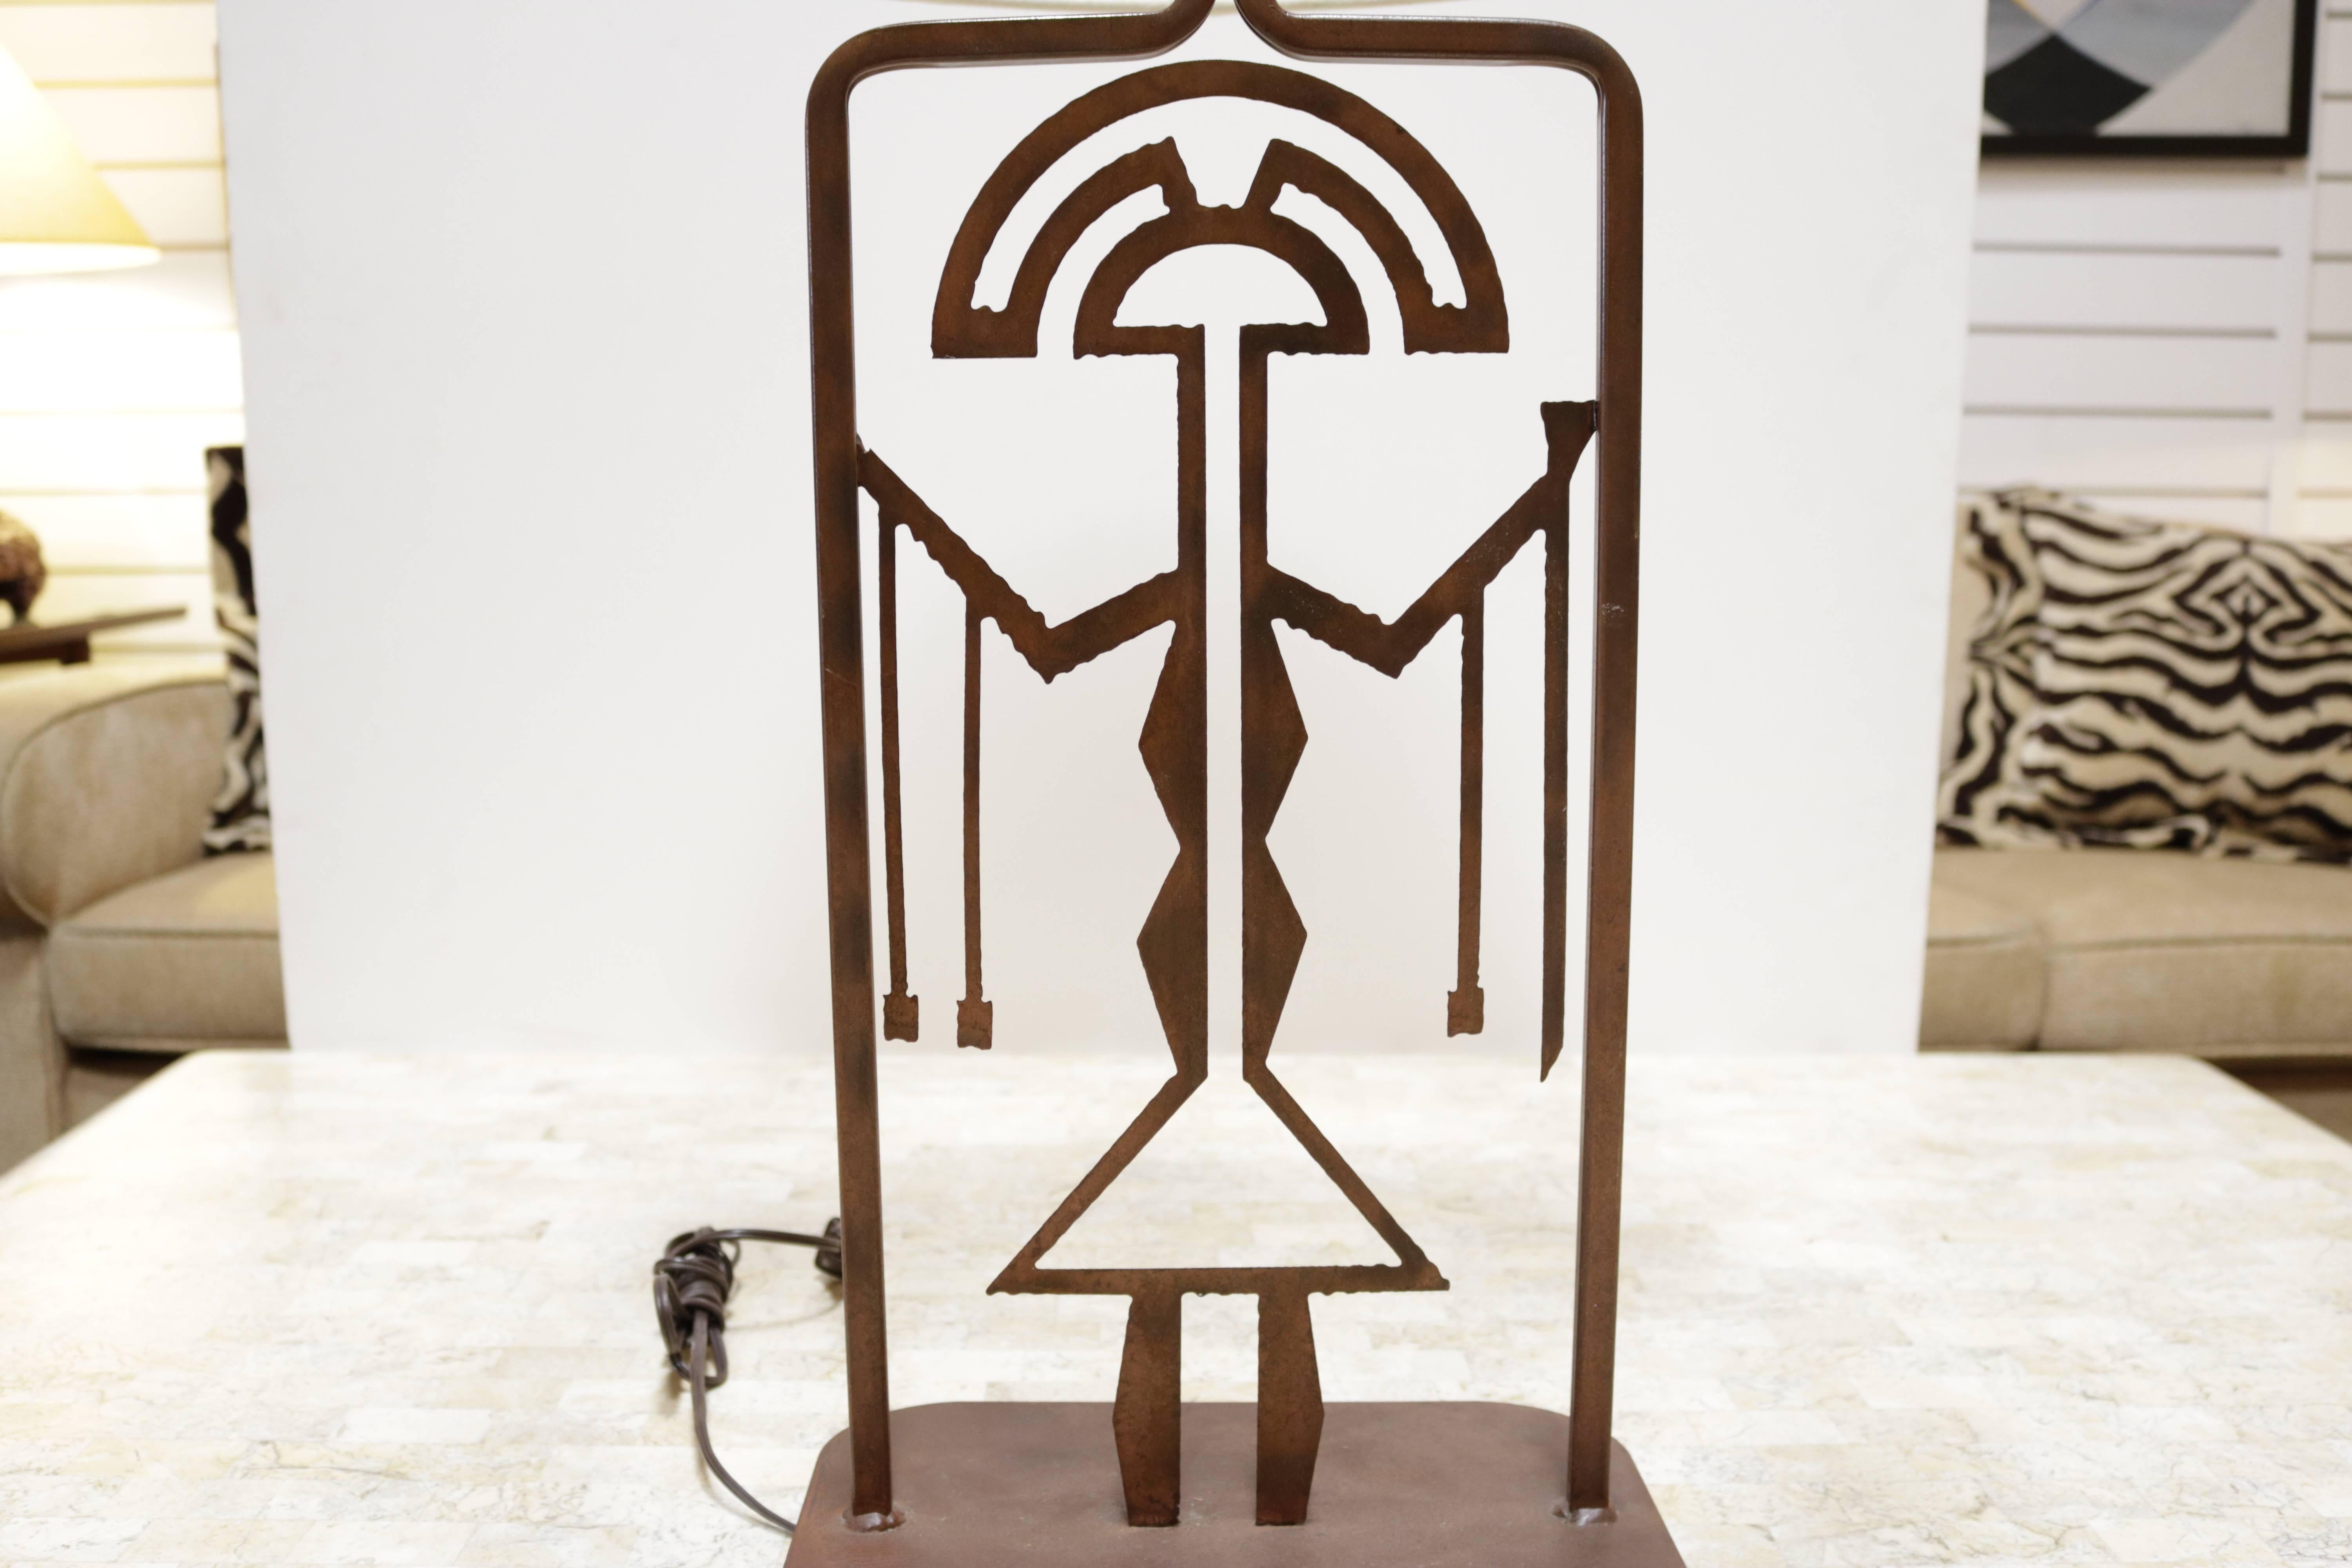 Metal lamp with an intentionally rusted finish. Lamp has a central symbolic figure similar to those used in ancient Latin American art.